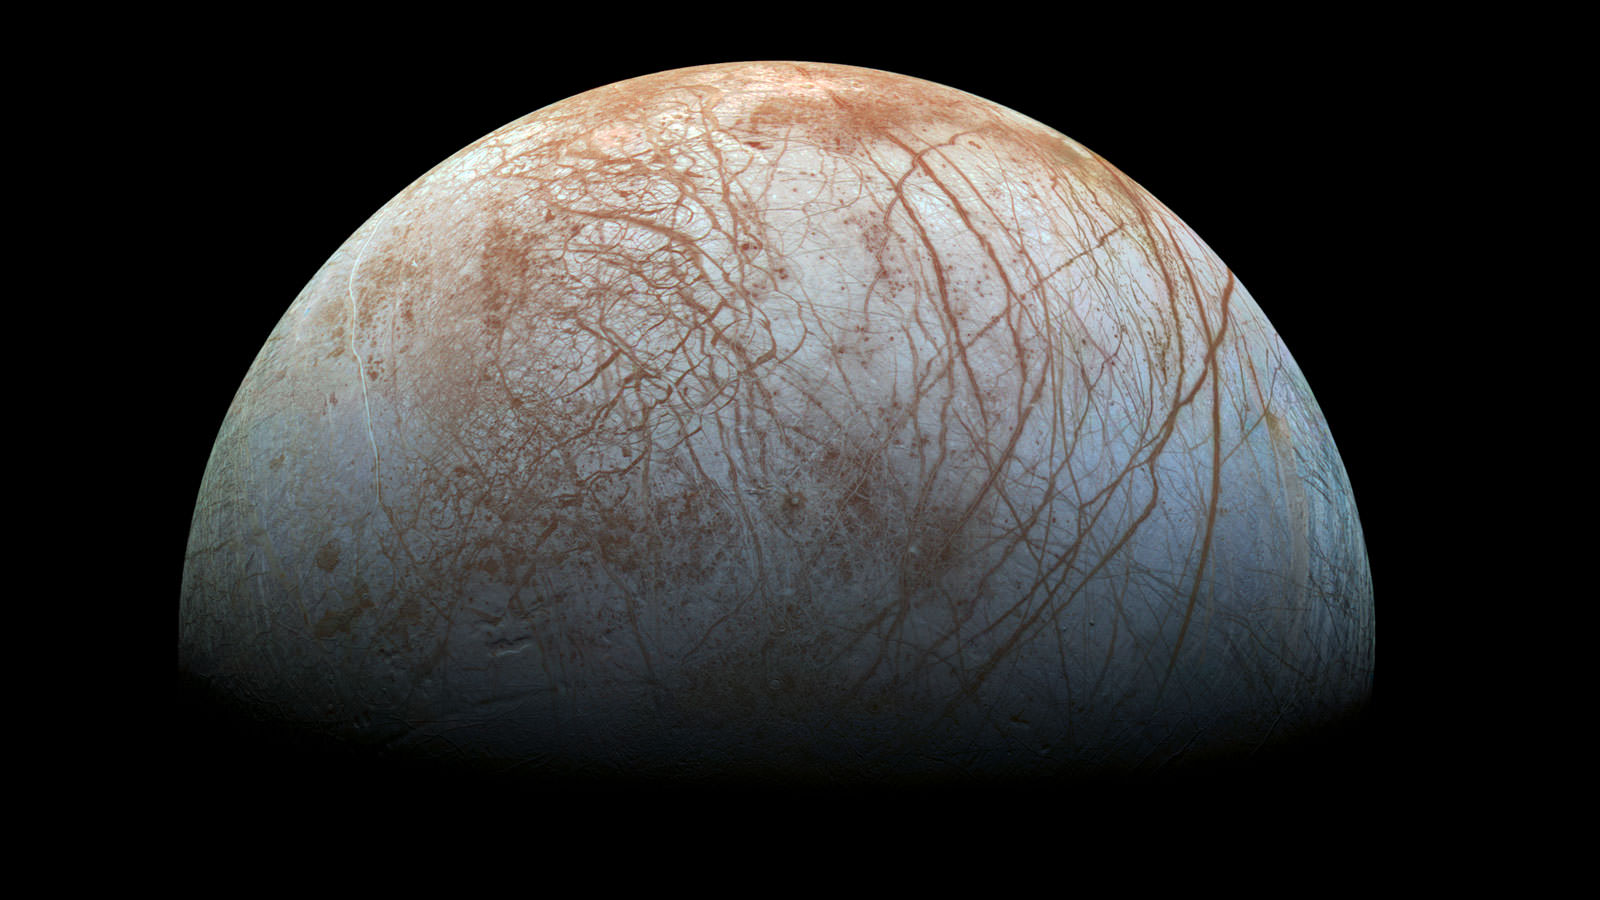 A "true color" image of the surface of Jupiter's moon Europa as seen by the Galileo spacecraft. Image credit: NASA/JPL-Caltech/SETI Institute